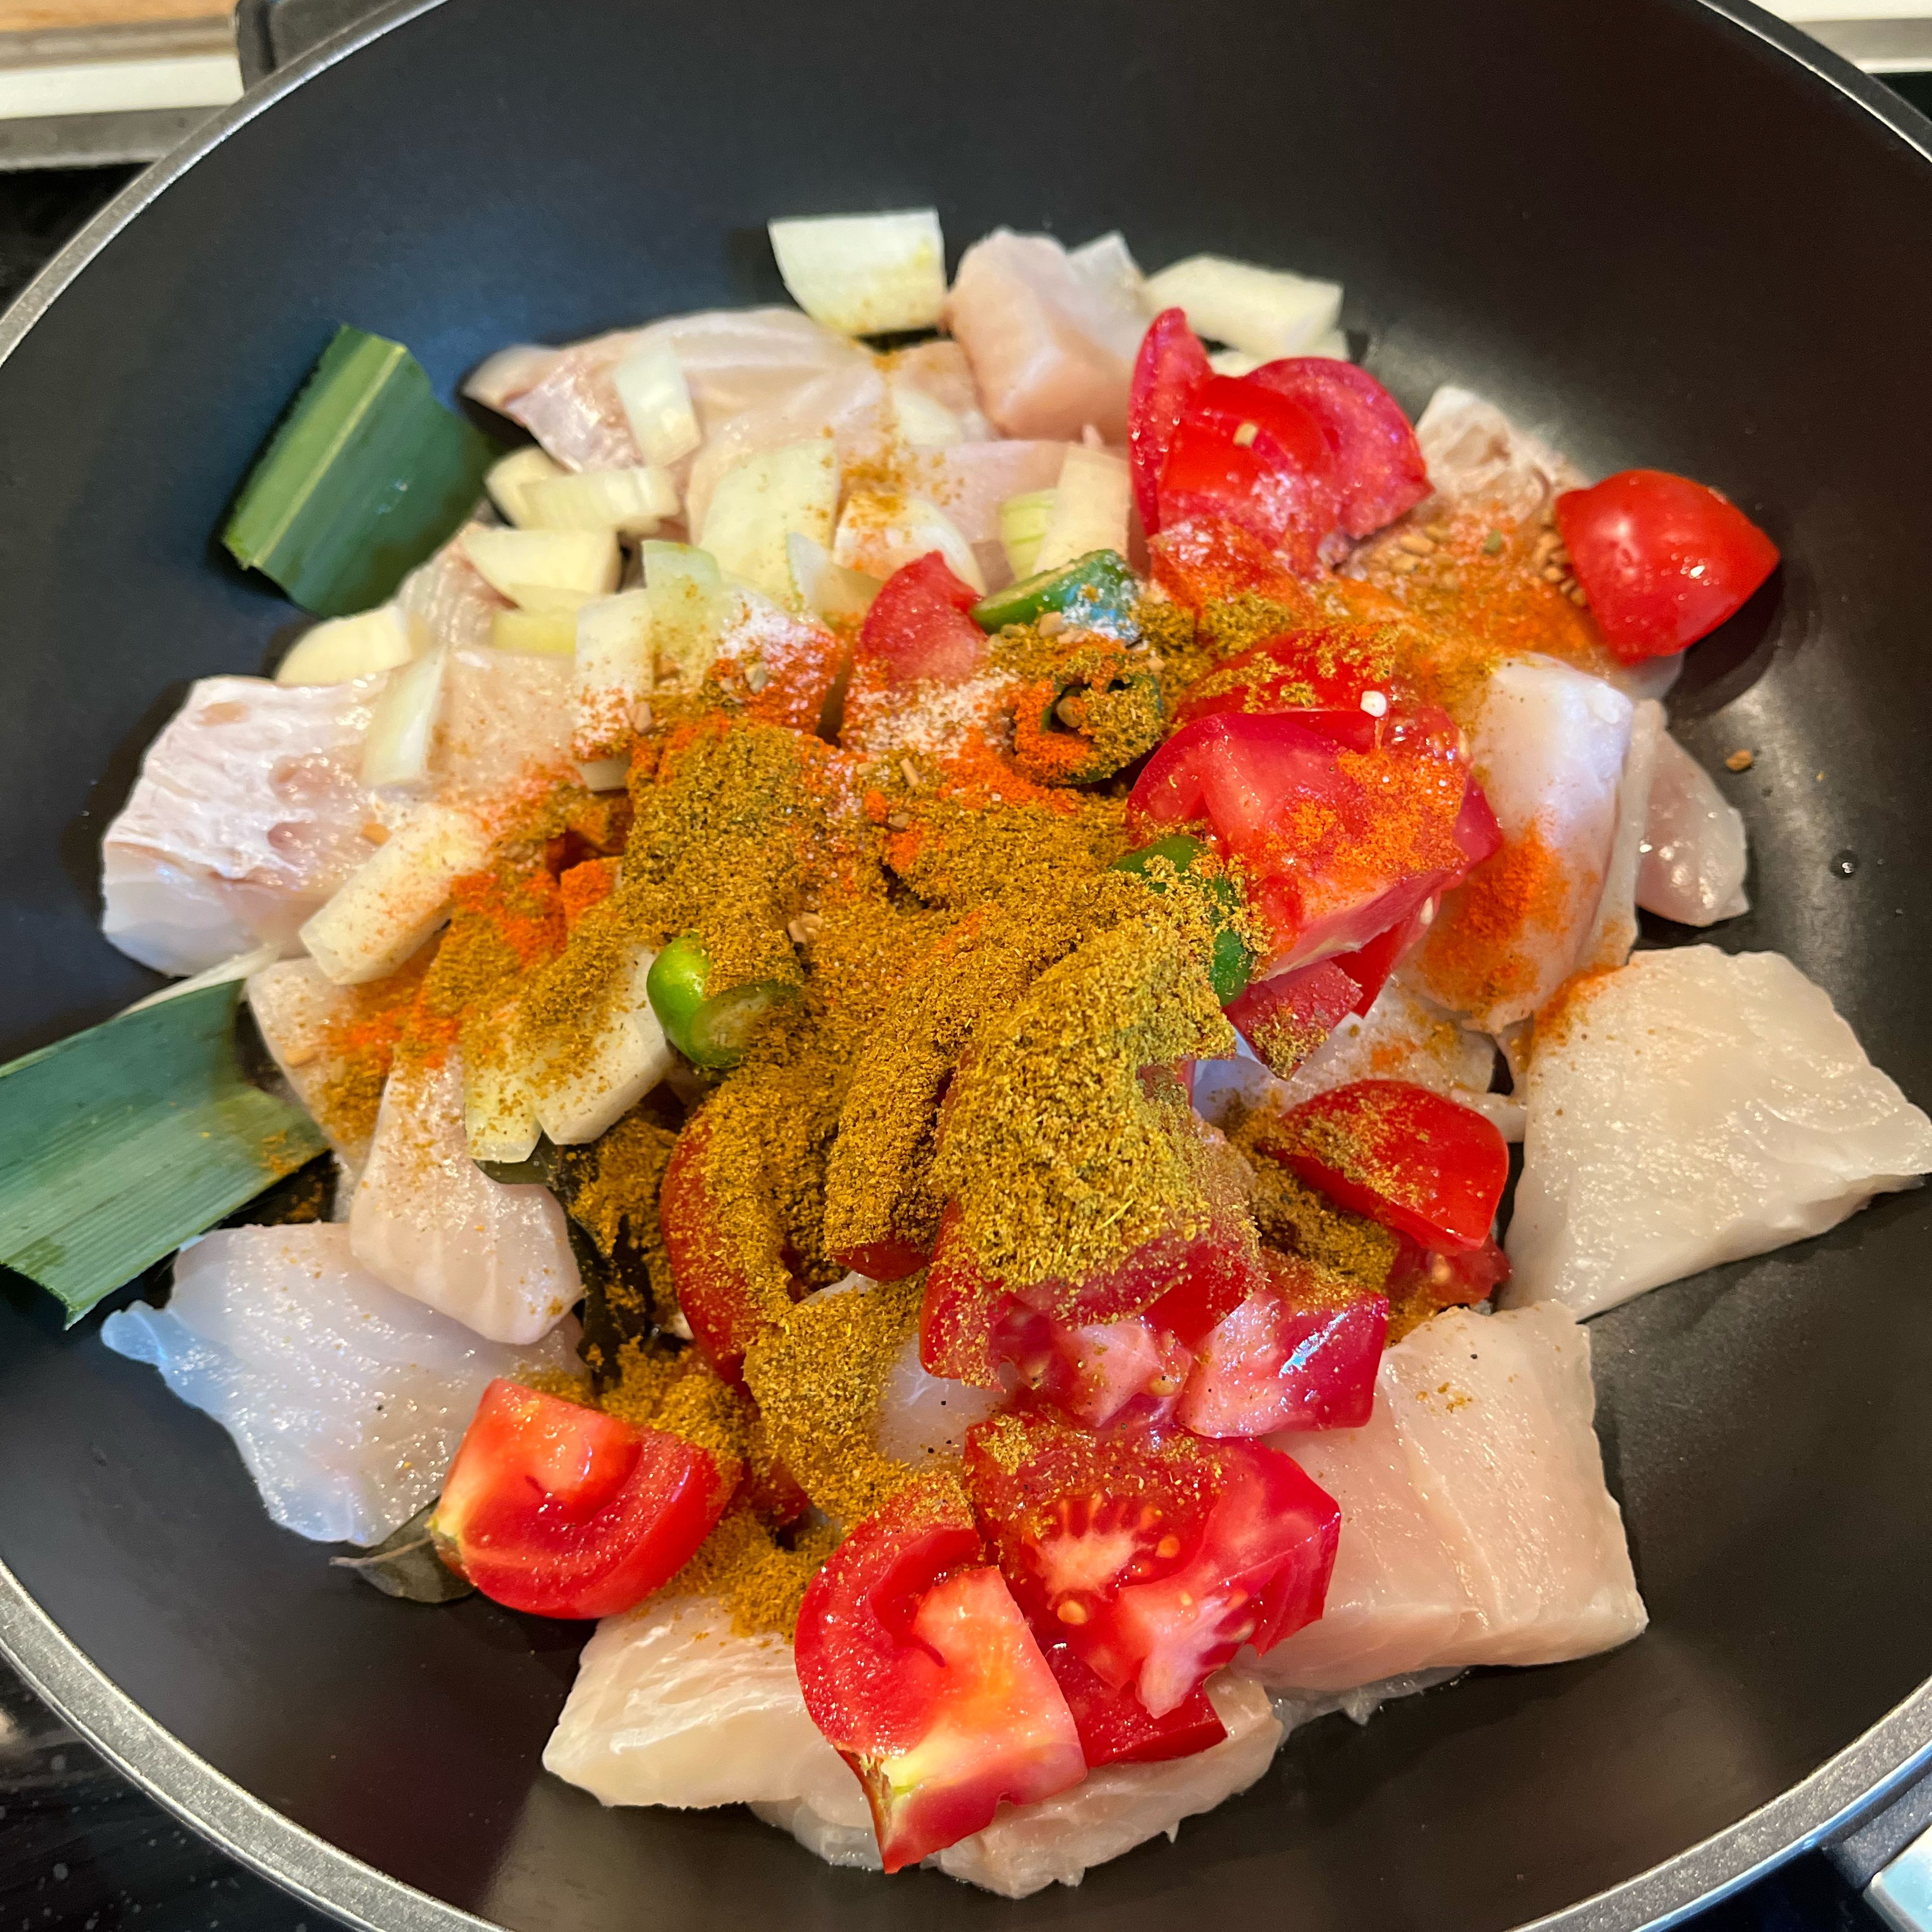 Wash the fish and transfer it to a chatty with all prepared ingredients and spices. Add lemon juice and coconut milk. Mix gently and bring to a boil.